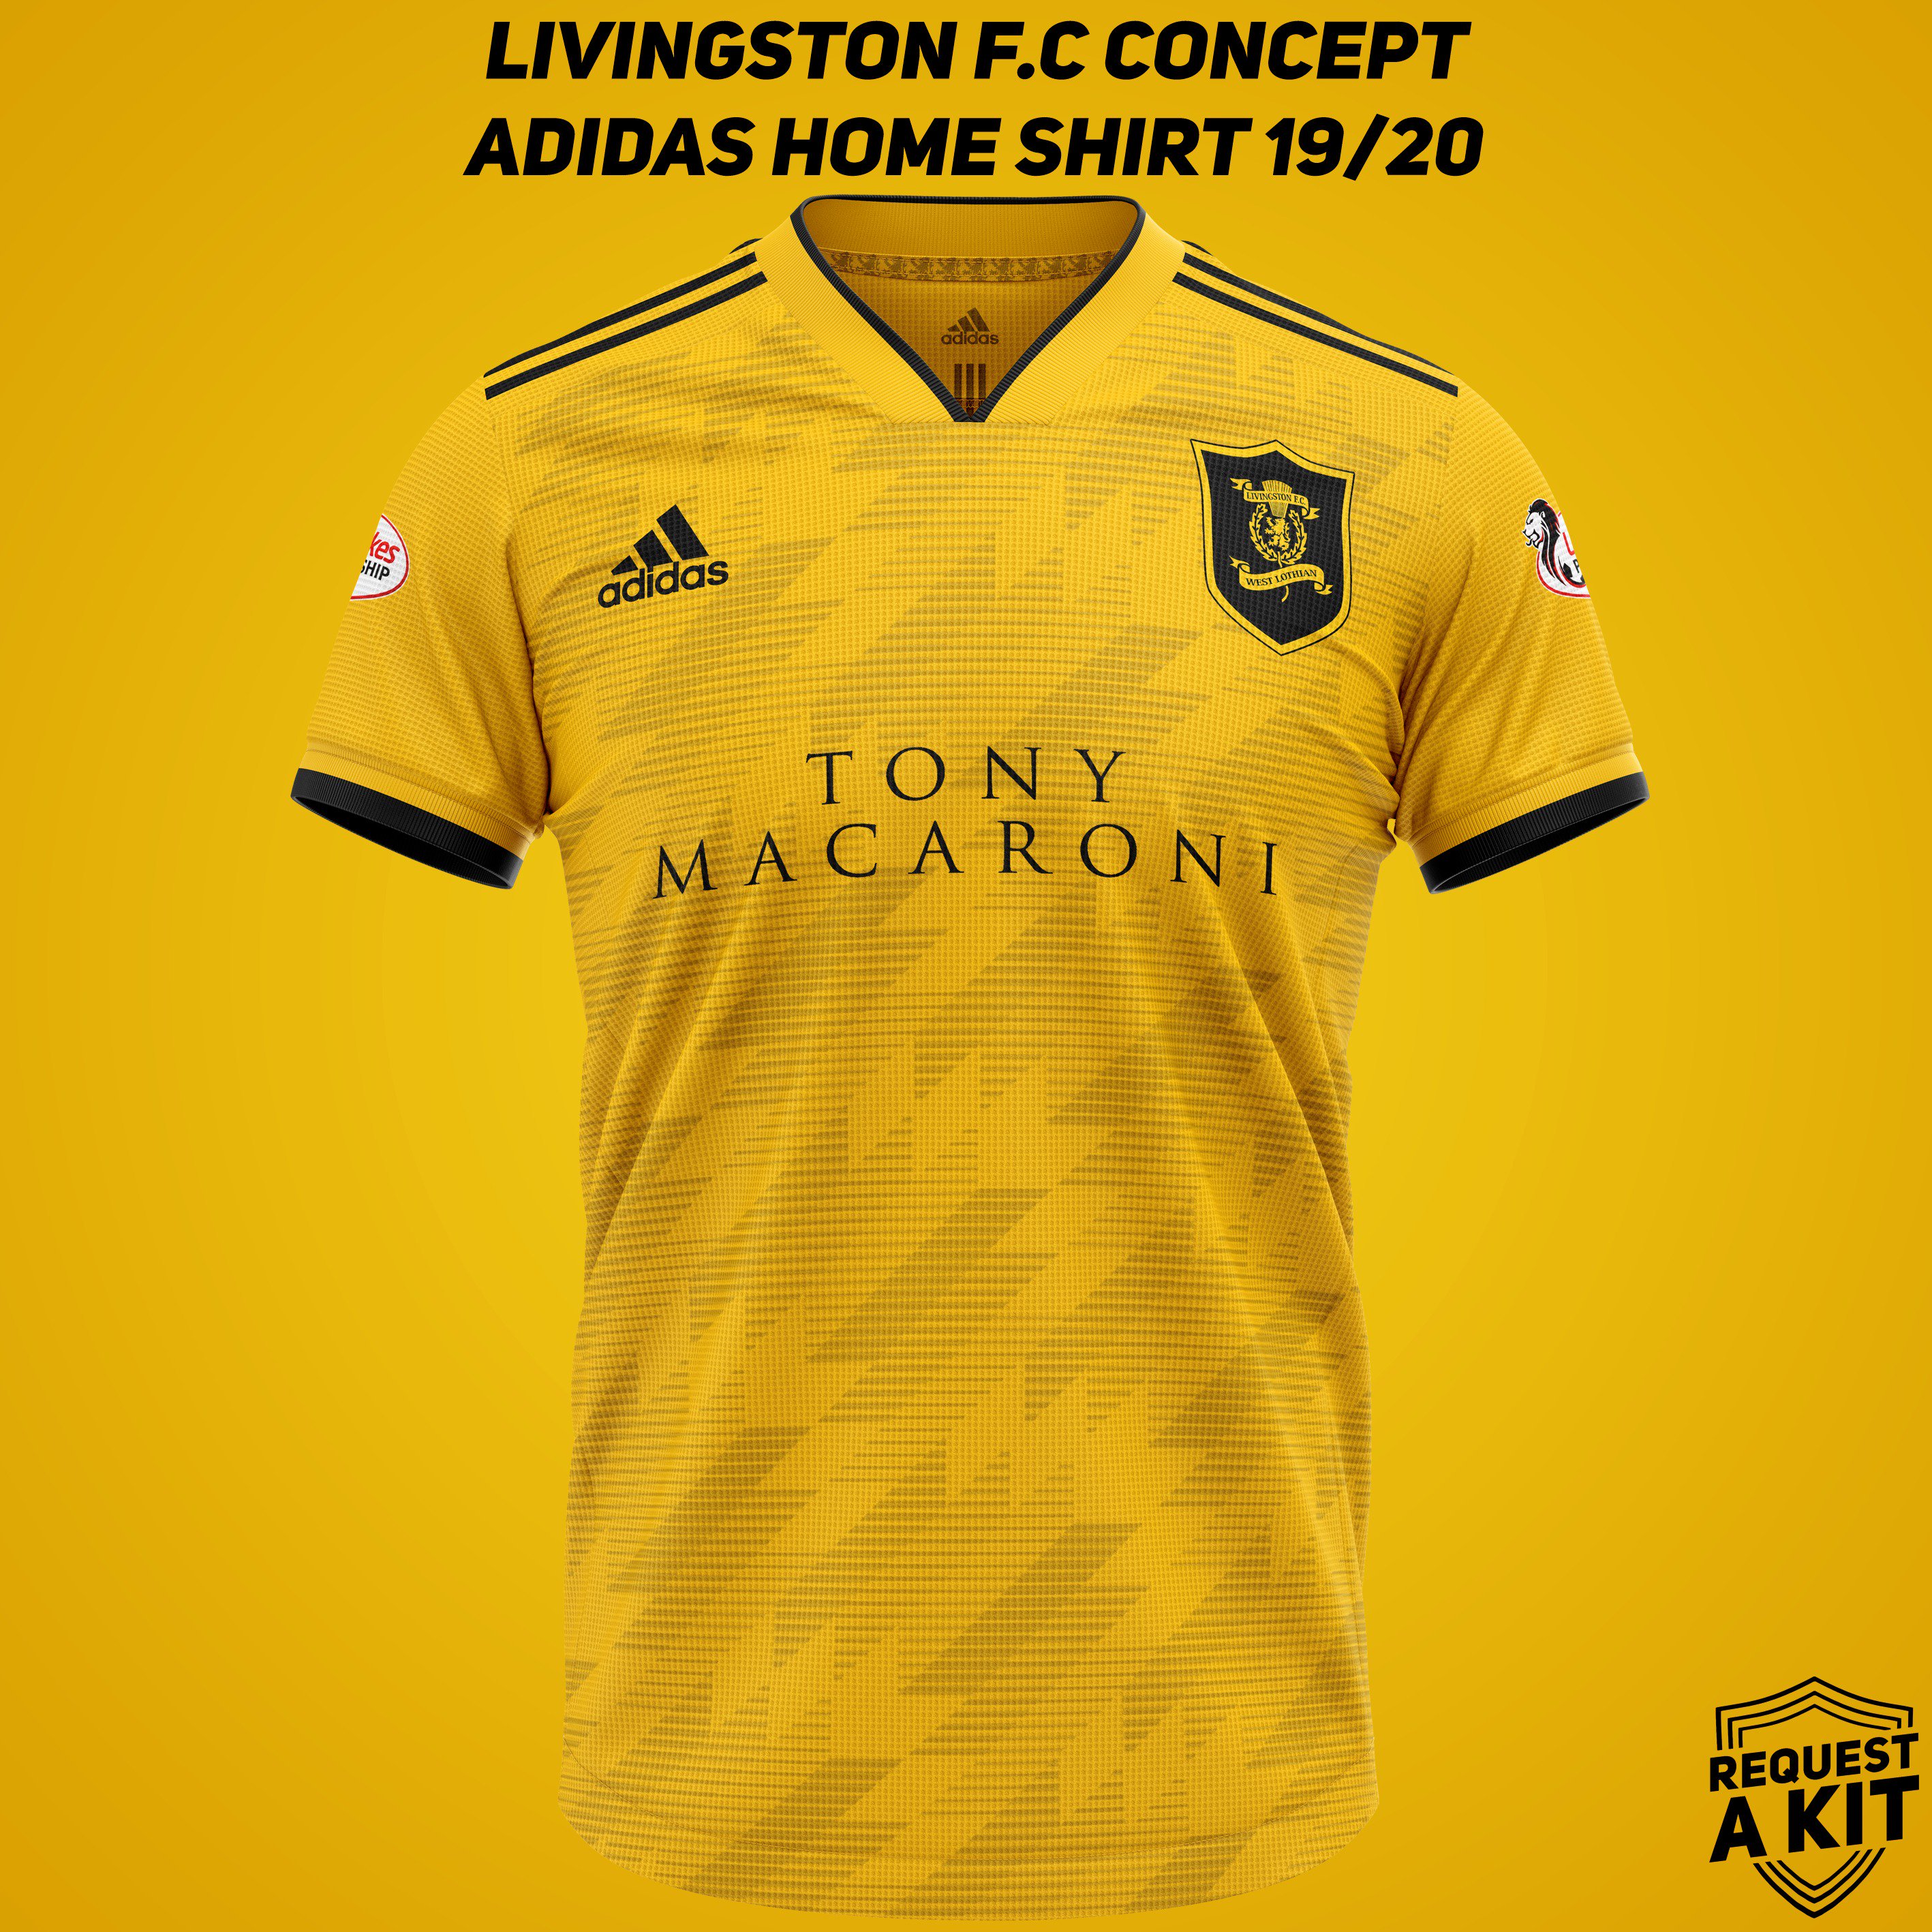 Request A Kit on Twitter: "Livingston F.C Concept Adidas Home and Away shirts 2019-20 (requested by @DanielS10Murie) #Livingston #SuperLivi #BeTheRoar #LFC #WeAreLivingstonFC #FM19 #WeAreTheCommunity Download for your Football Manager save here!: https